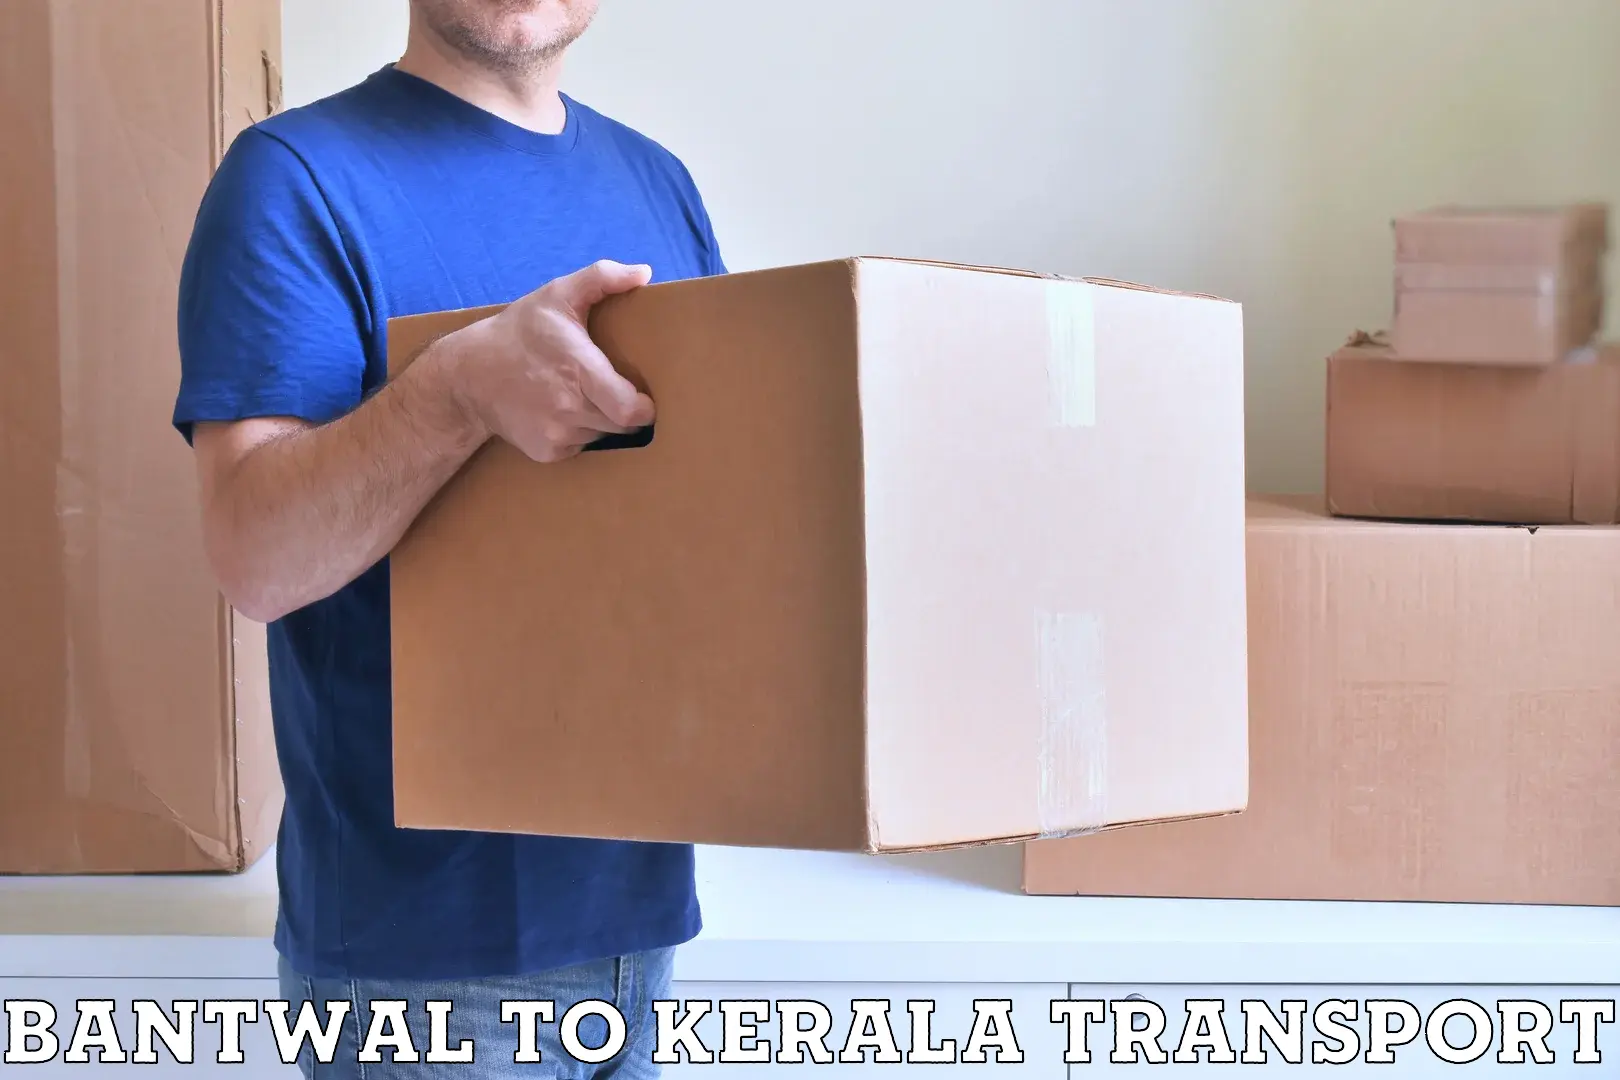 Container transport service Bantwal to Vaikom